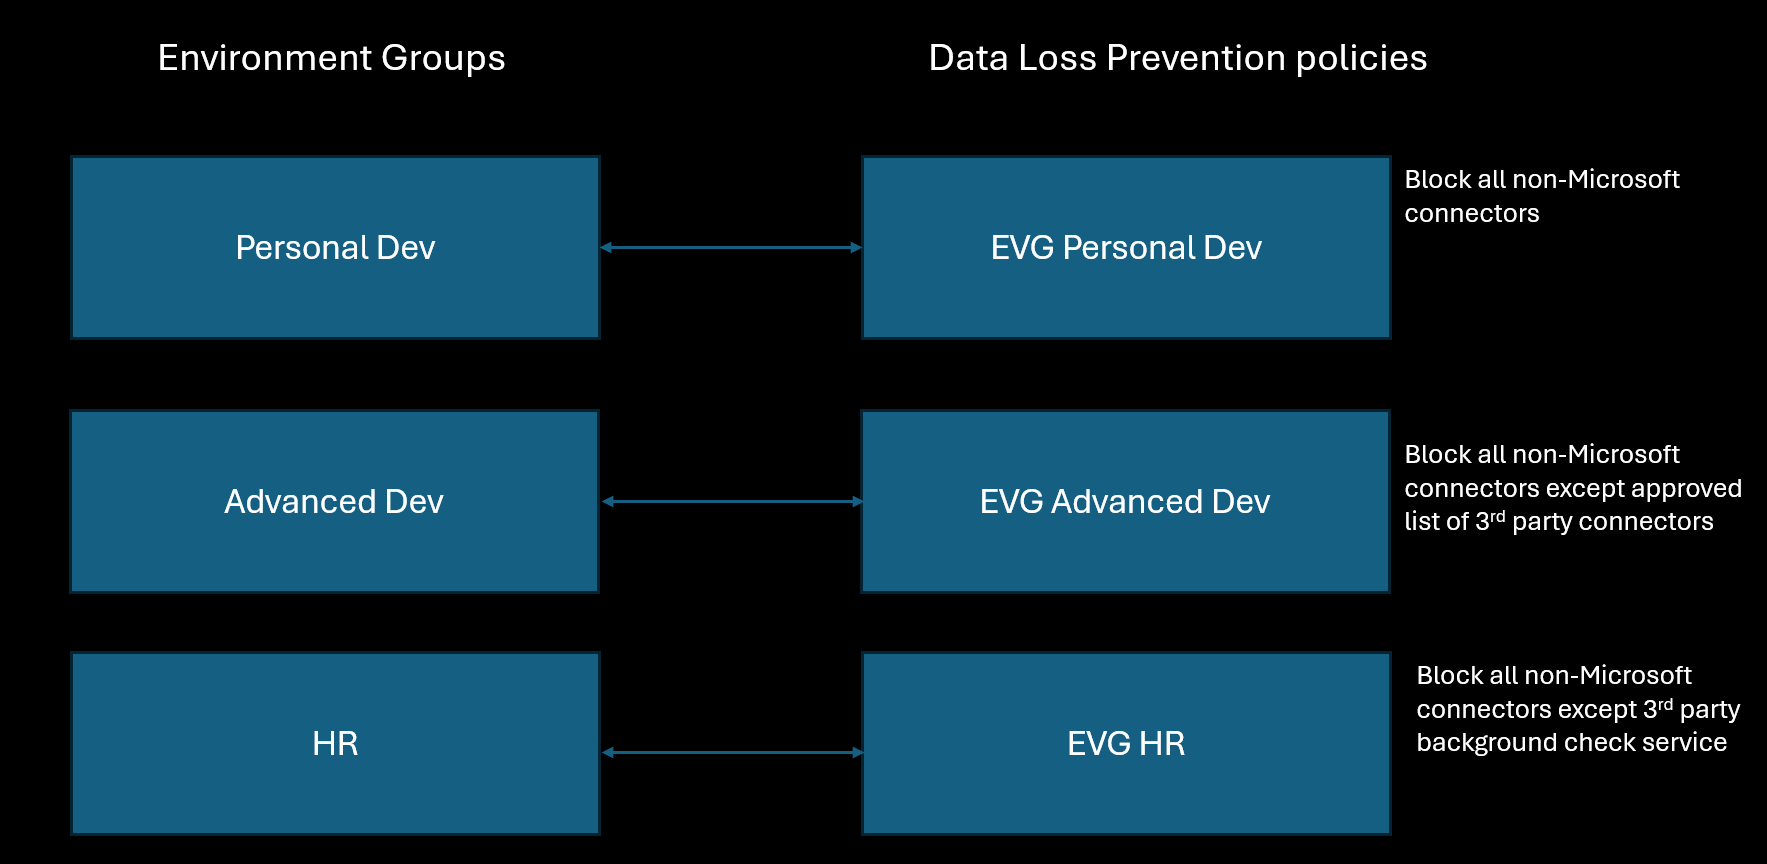 Diagram illustrating the relationship between environment groups and similarly named data loss prevention policies that apply to them